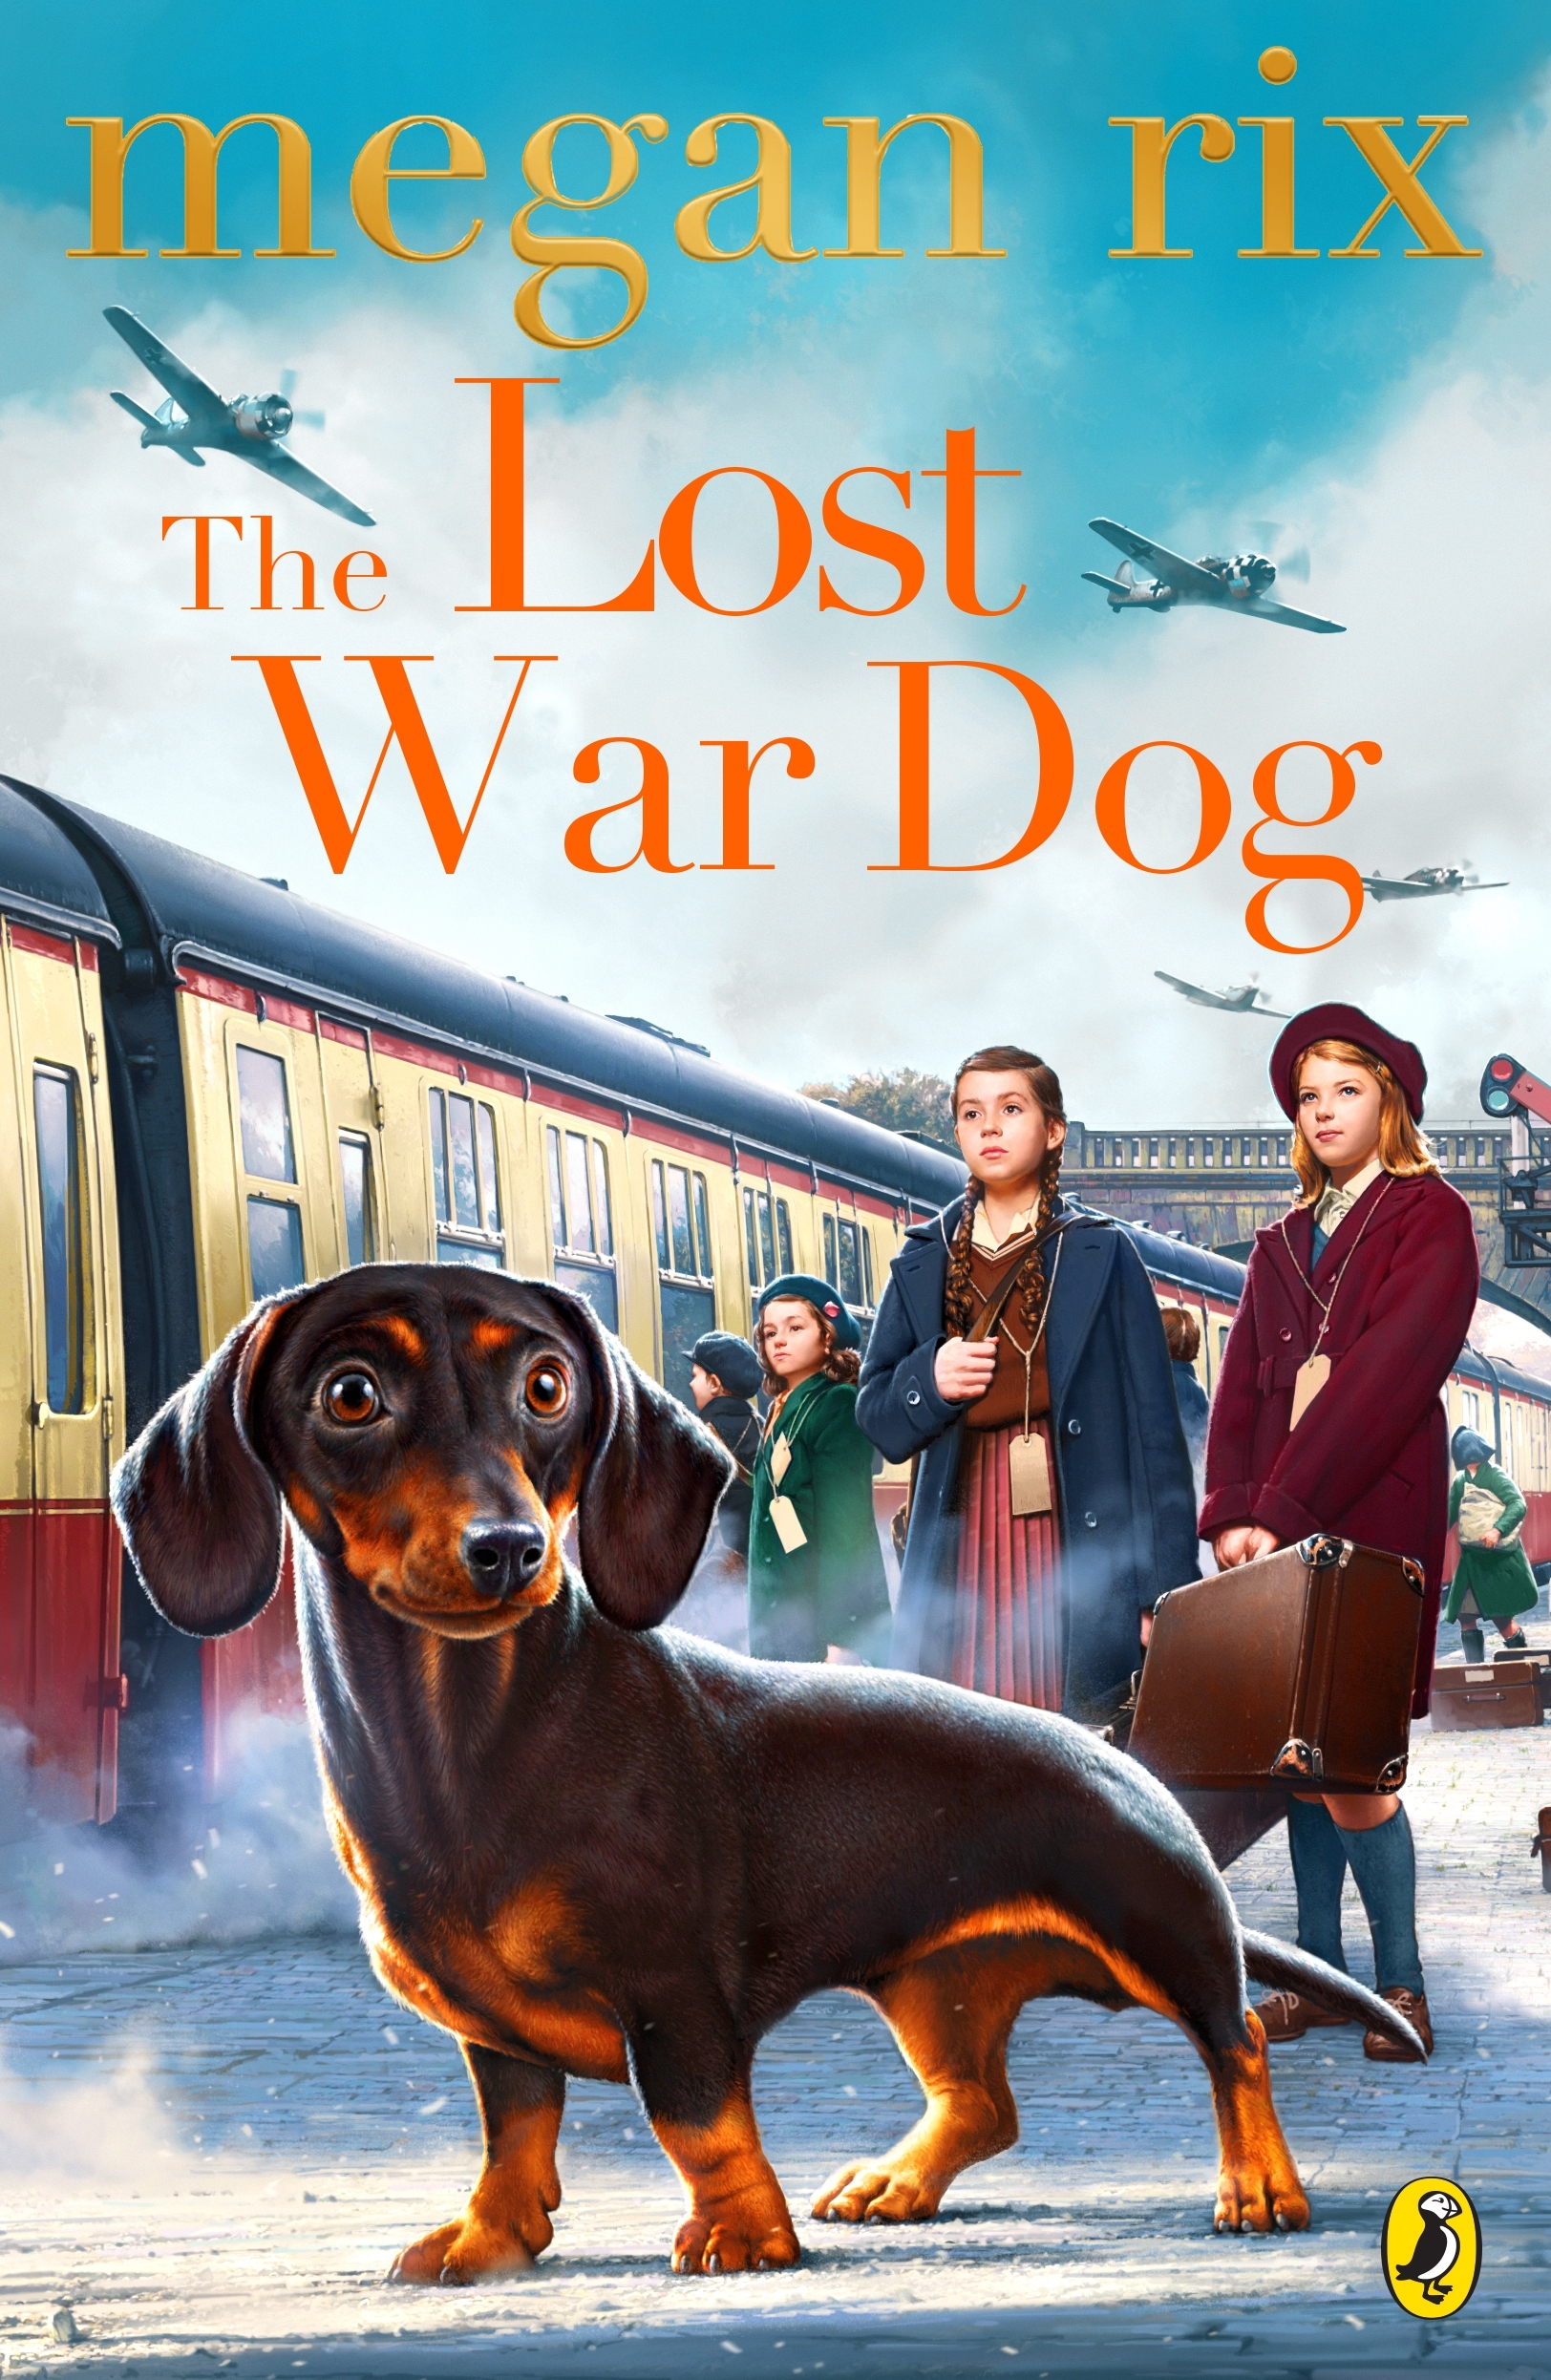 The Lost War Dog by Megan Rix Penguin Books New Zealand